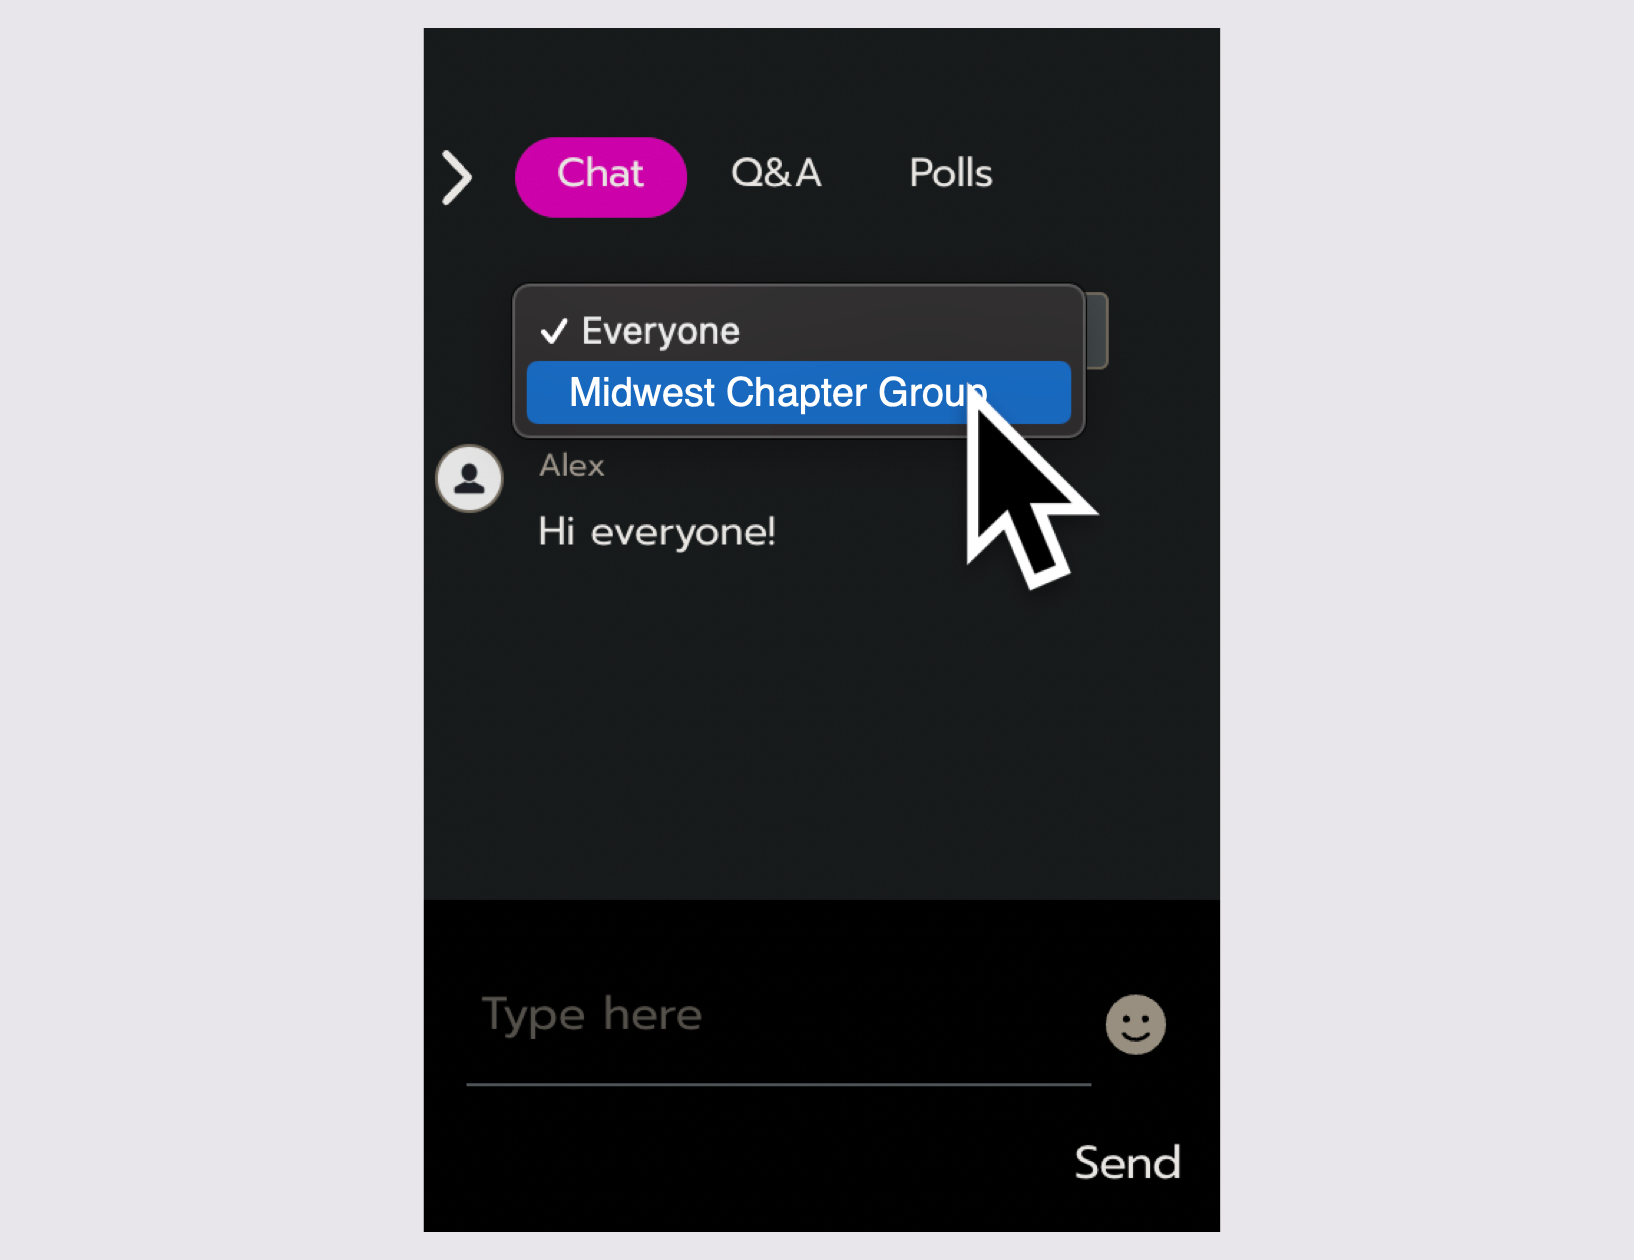 The chat channels dropdown is open. It shows two channels (Everyone and Midwest Chapter Group).